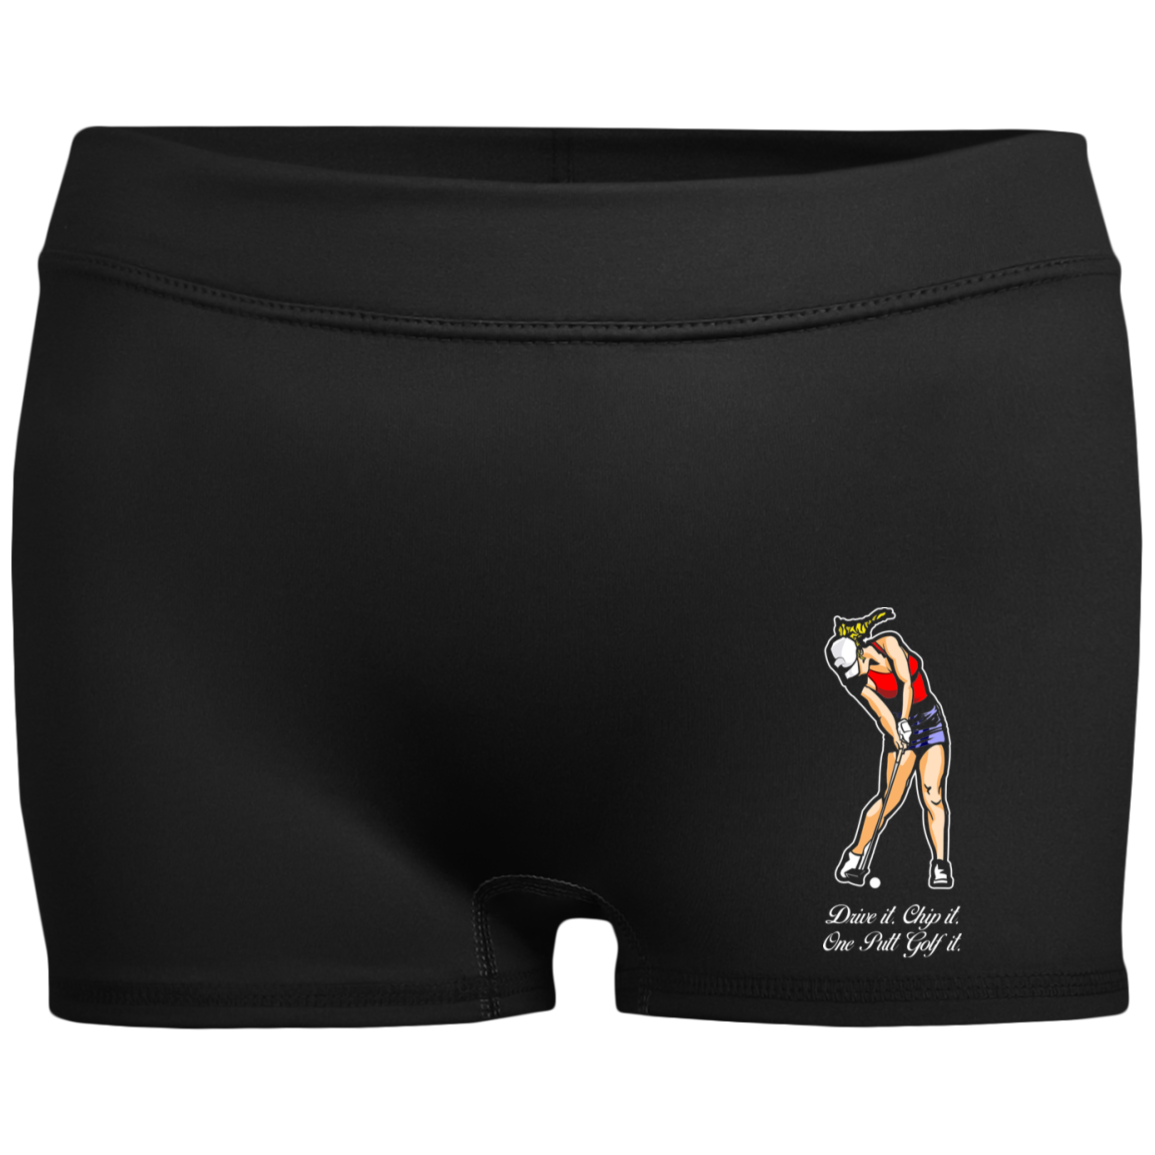 OPG Custom Design #9. Drive it. Chip it. One Putt Golf It. Golf So. Cal. Ladies' Fitted Moisture-Wicking 2.5 inch Inseam Shorts